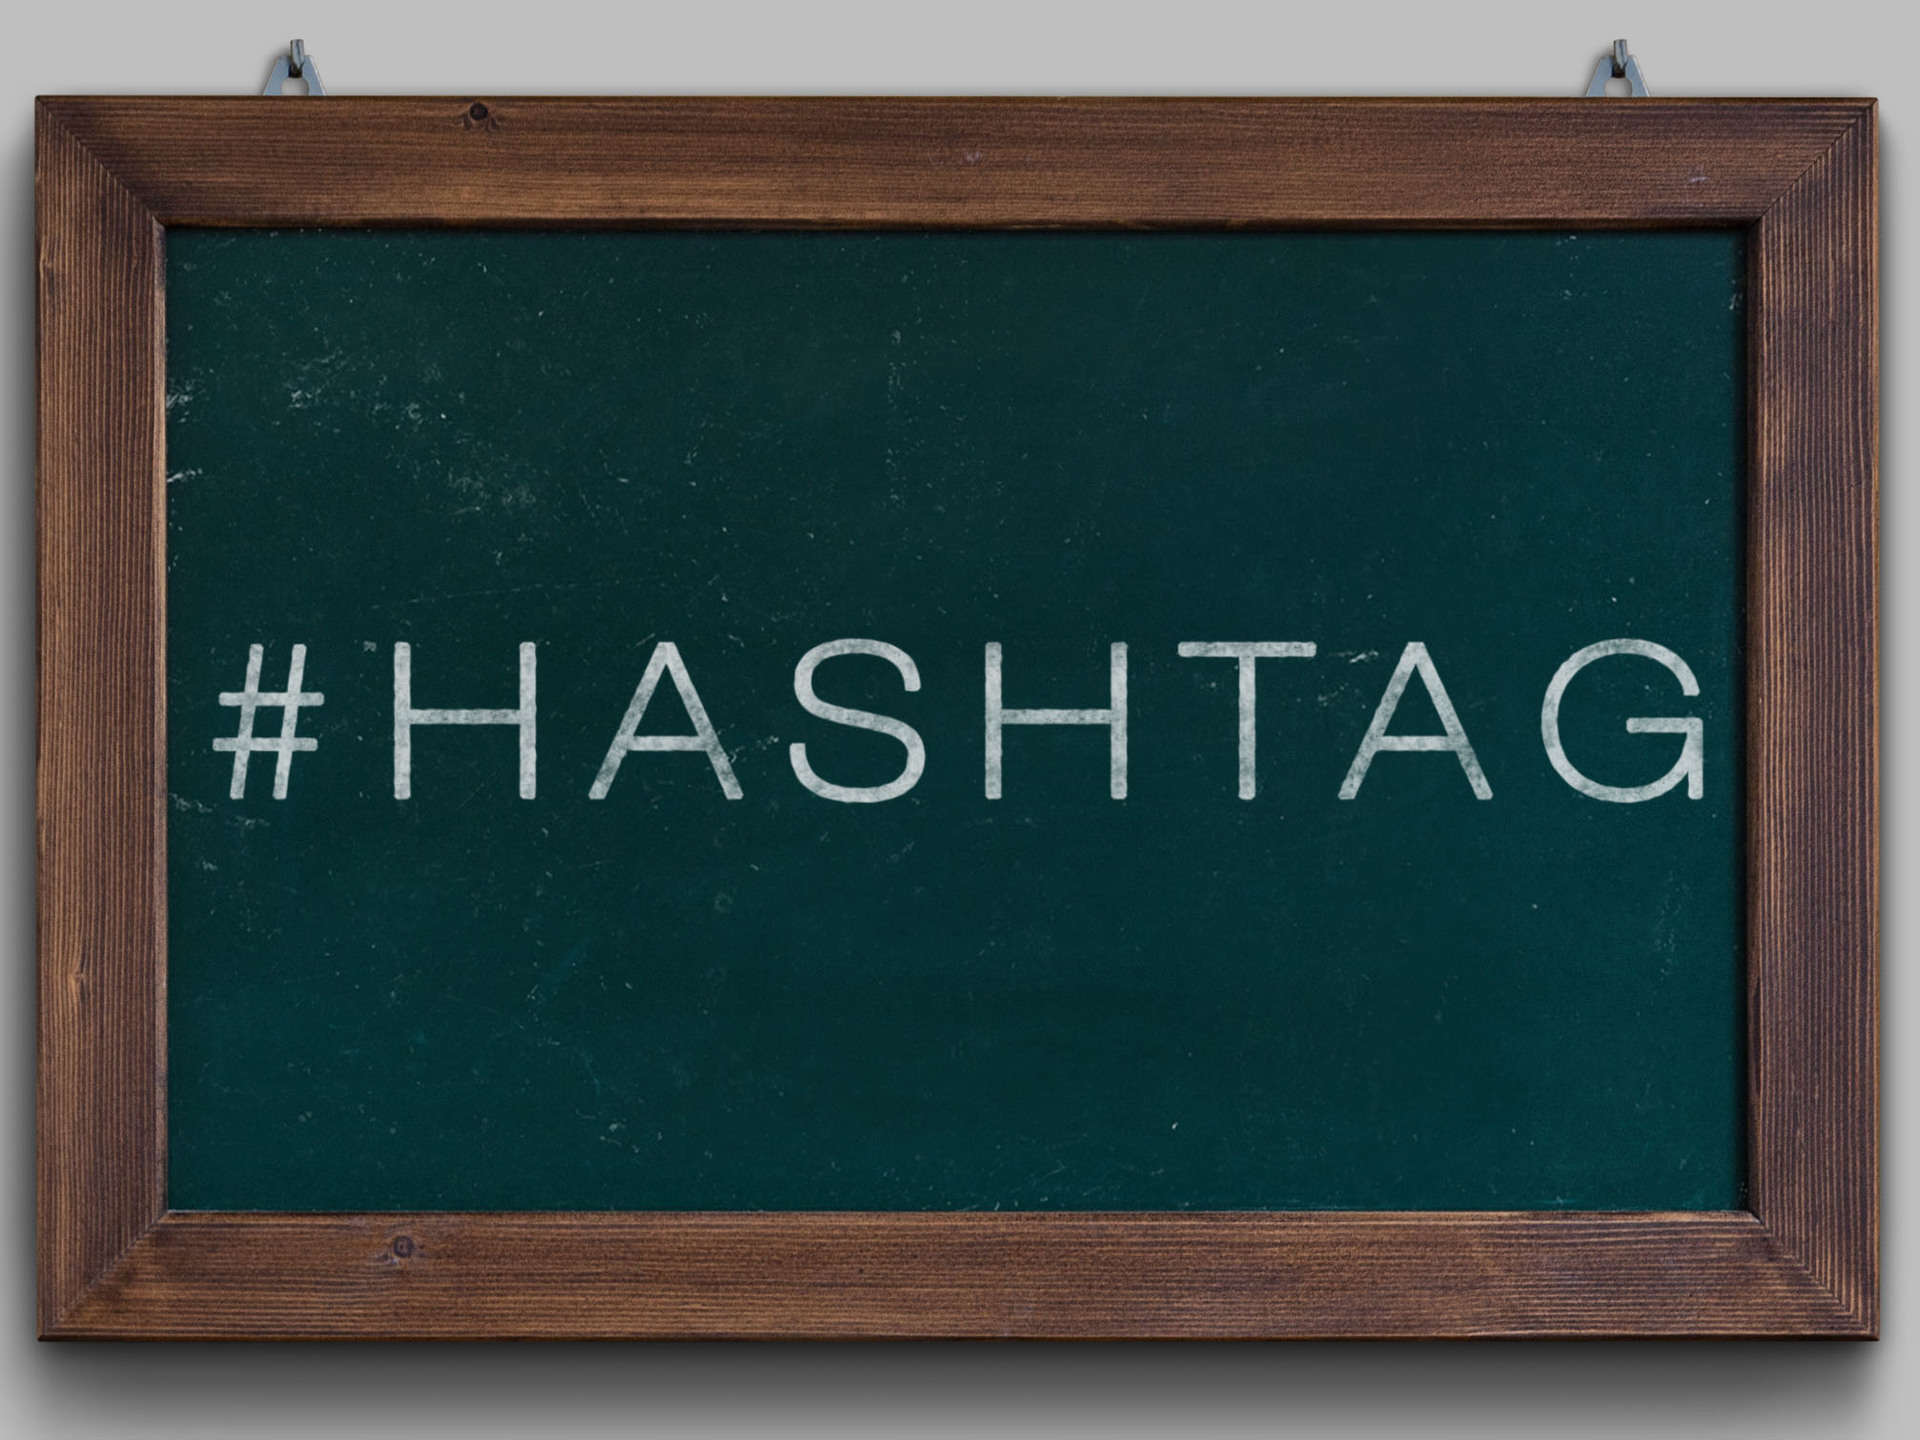 Hashtag Chalkboard - Picture Frame - HD Wallpaper 